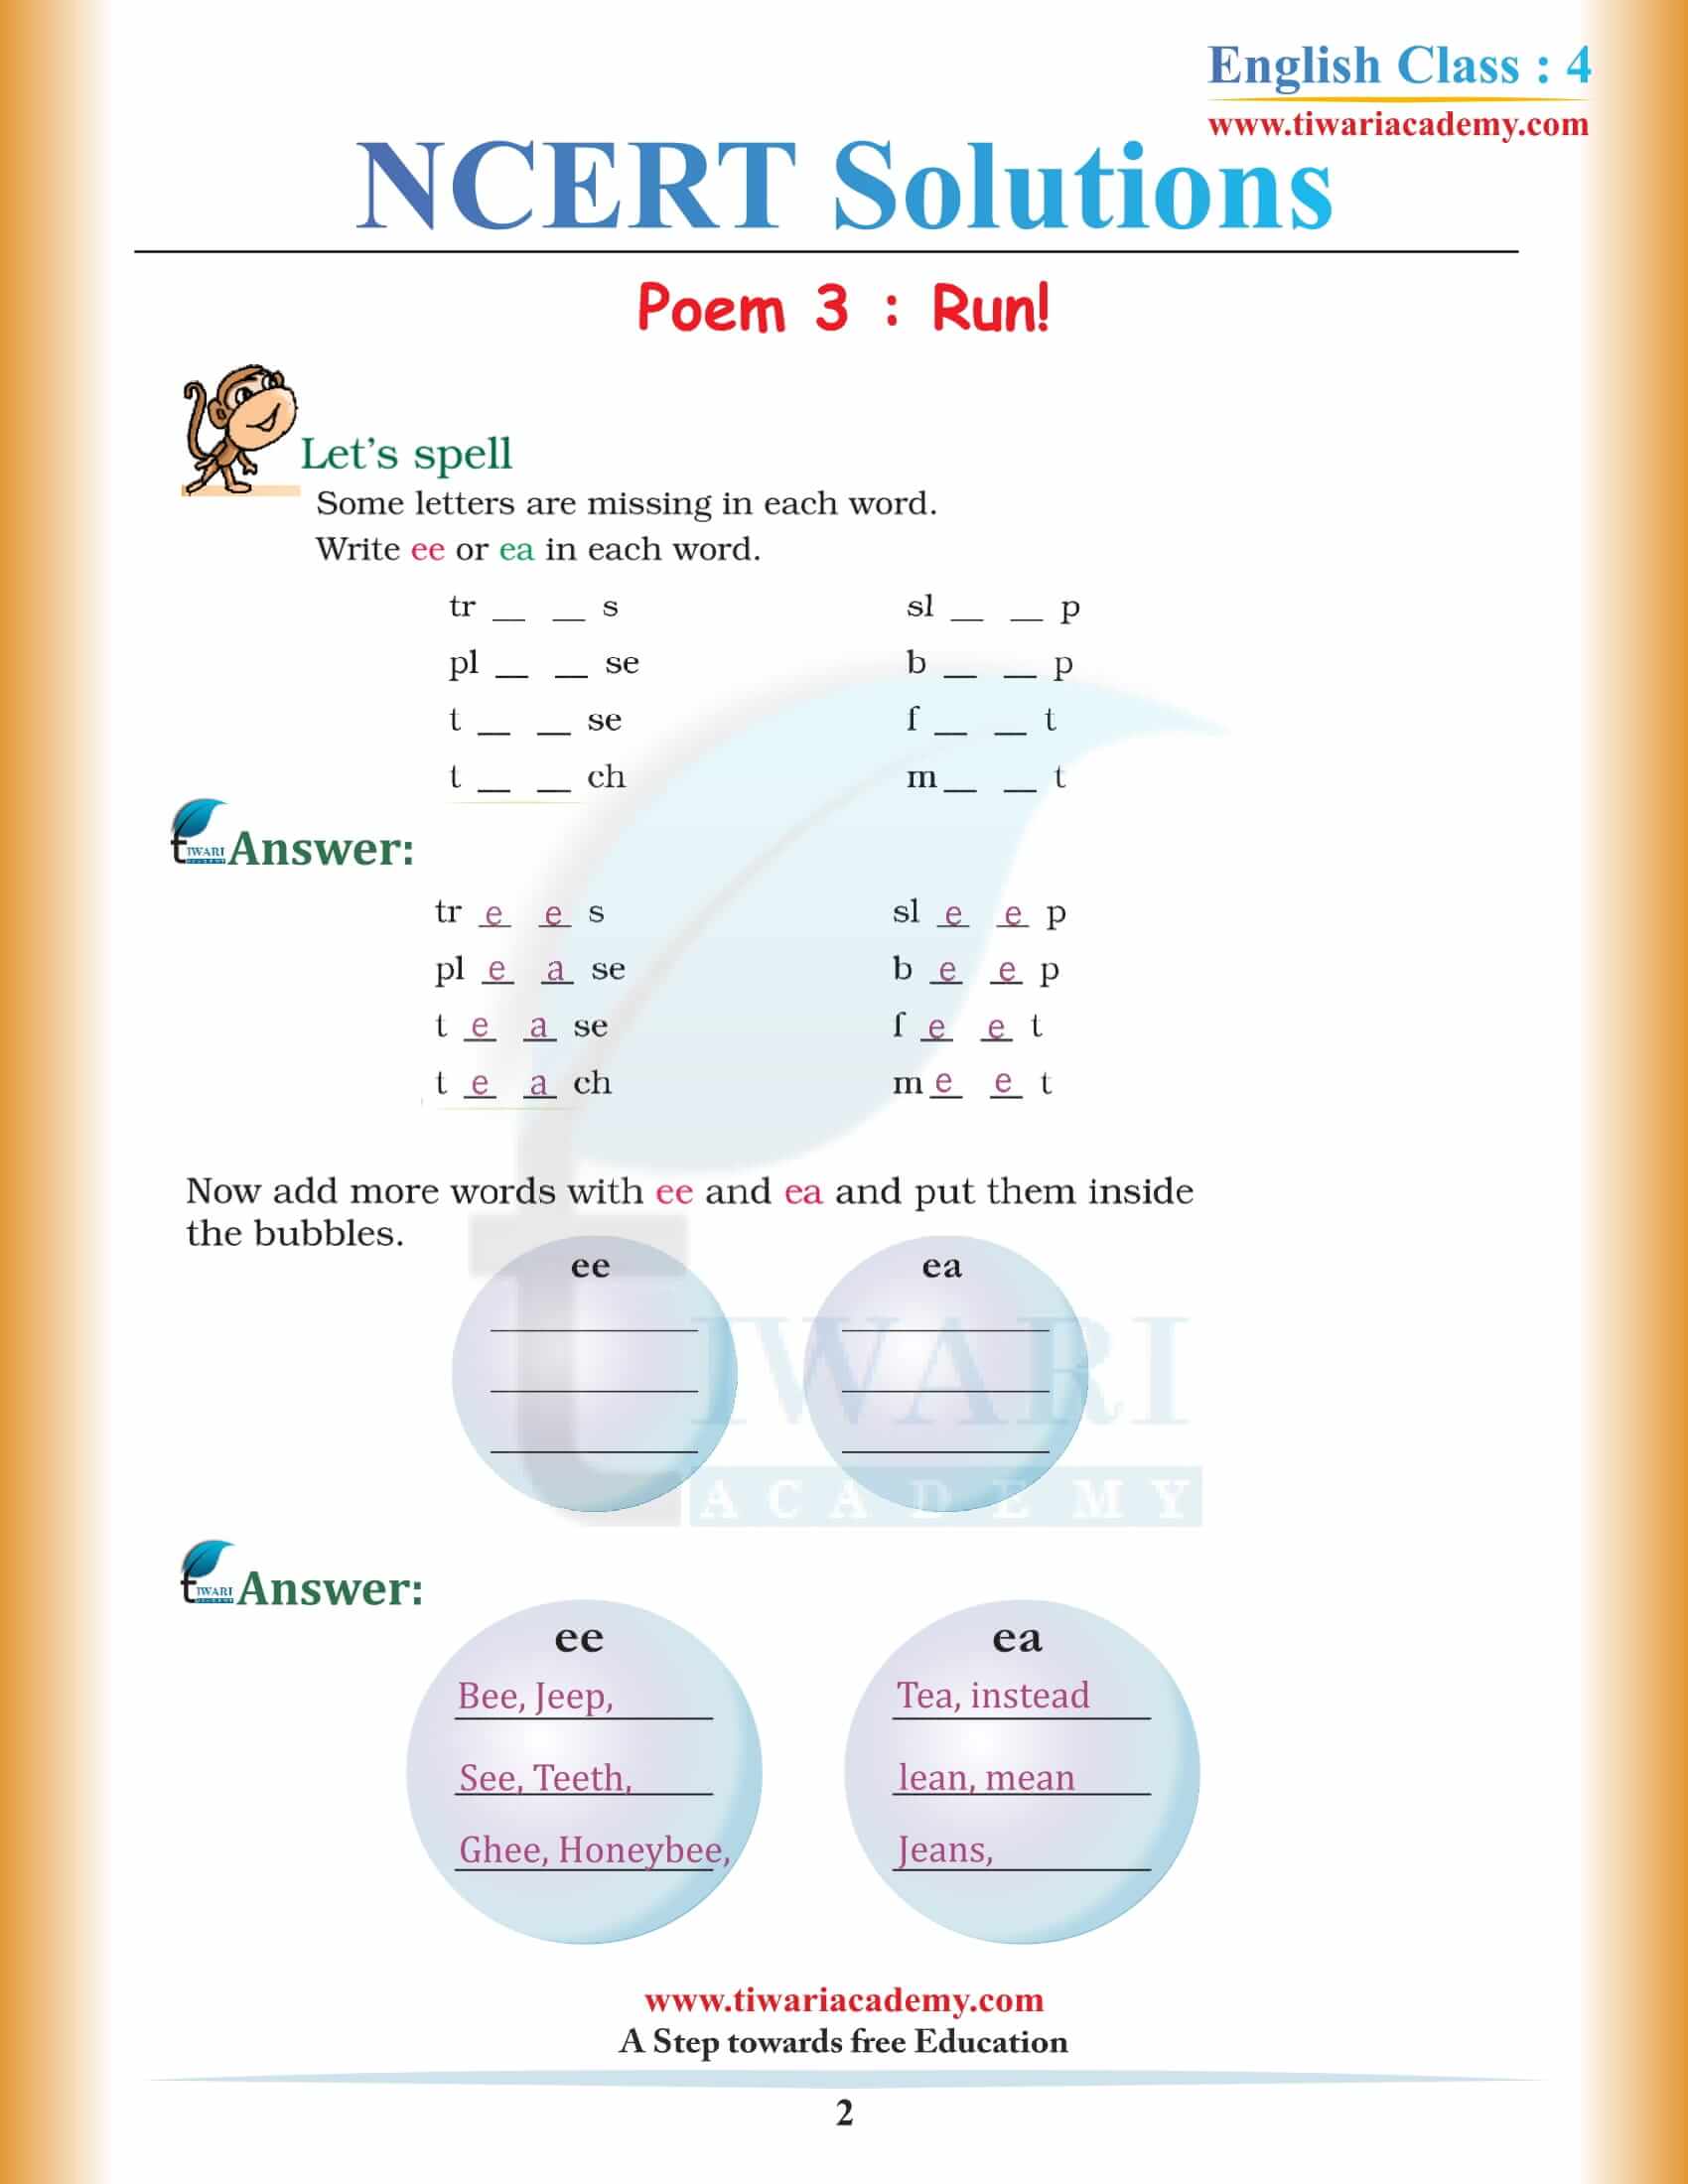 NCERT Solutions for Class 4 English Unit 3 Chapter 1